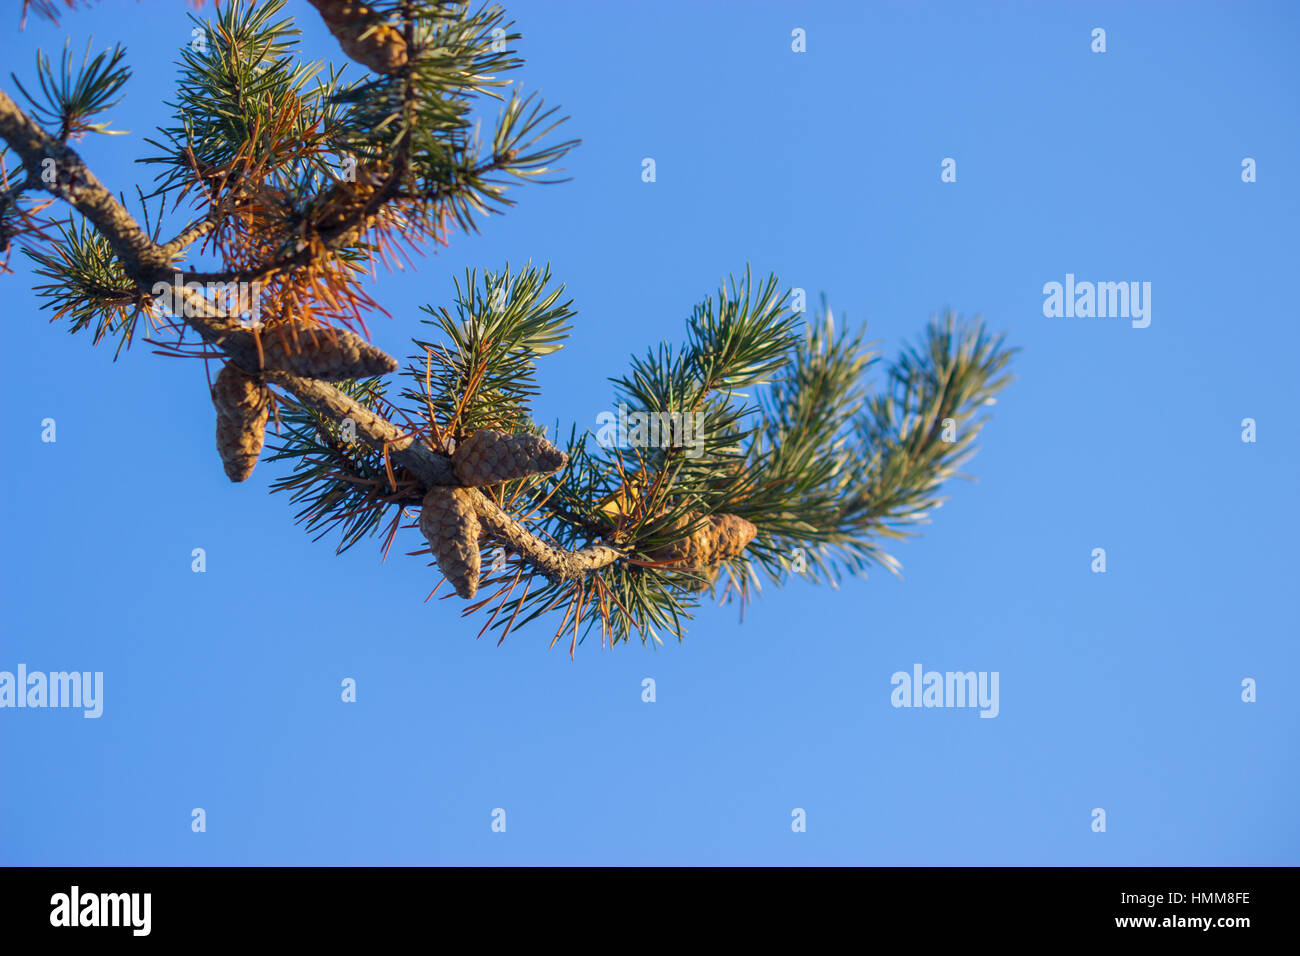 close up of the christmas tree brunch with cones Stock Photo